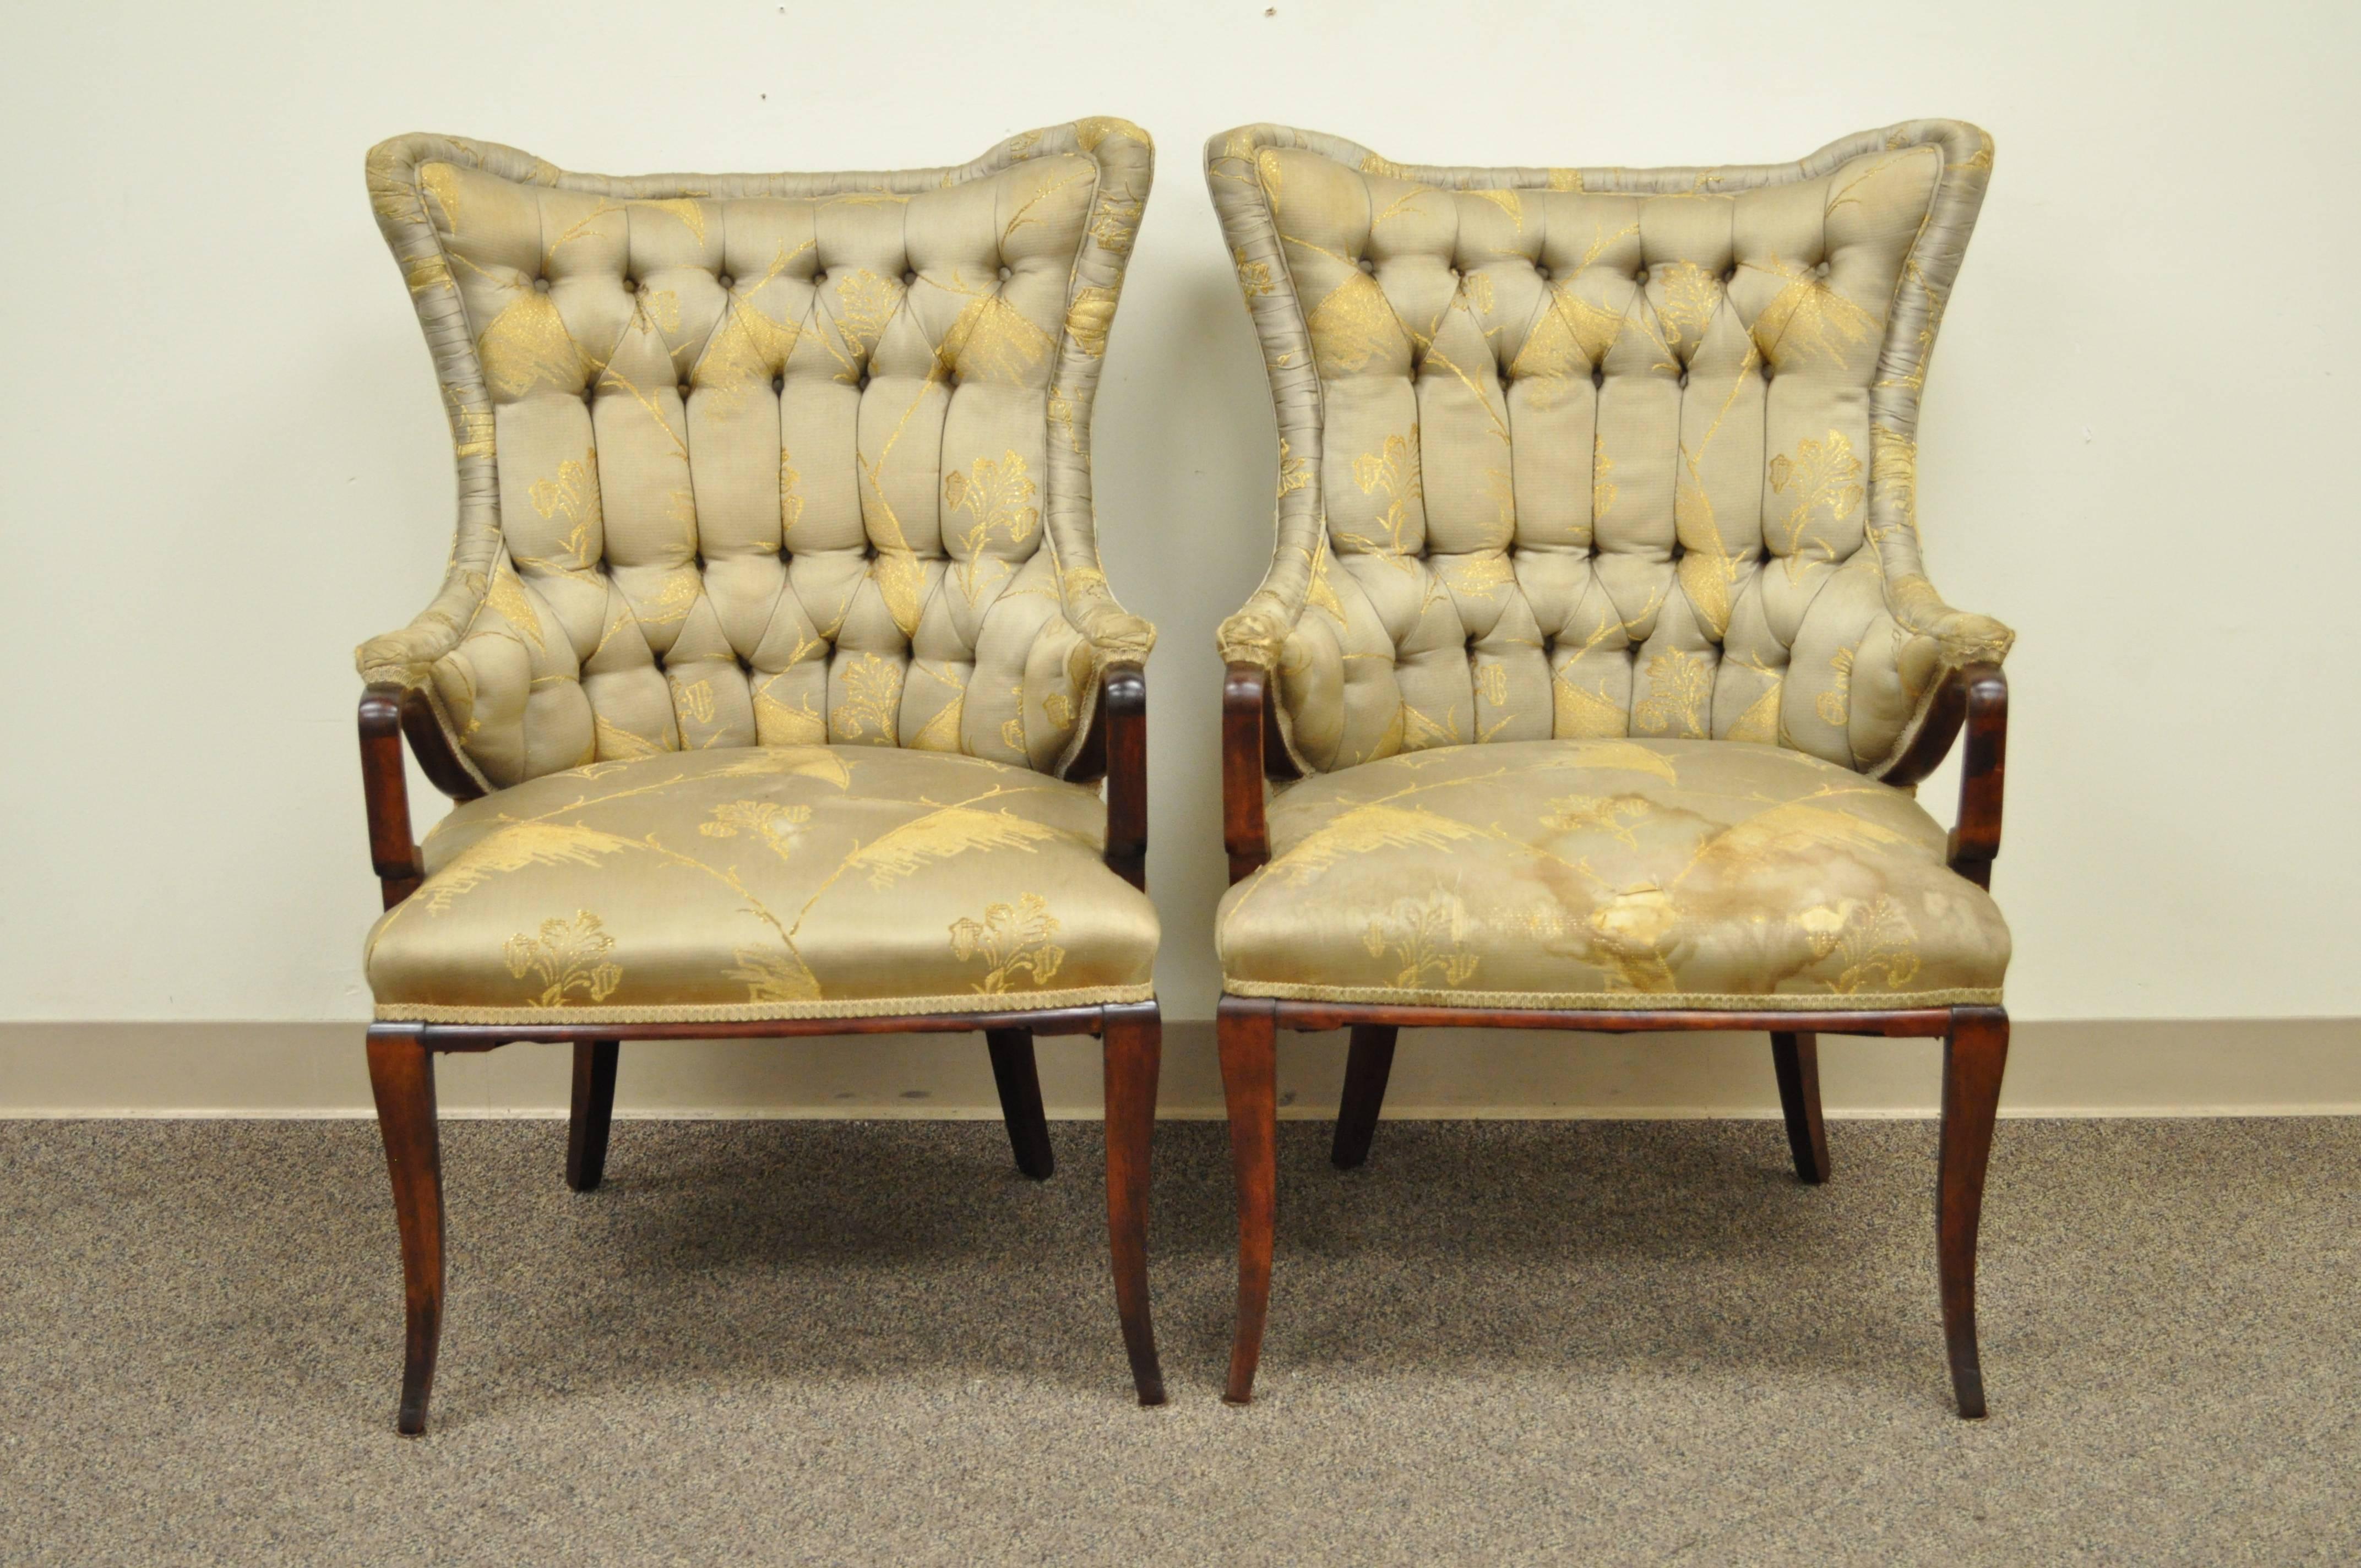 Quality pair of 1940s mahogany fireside armchairs attributed to Grosfeld House. The pair has a very unique Chinese Chippendale style with shaped wingbacks and tapered legs.